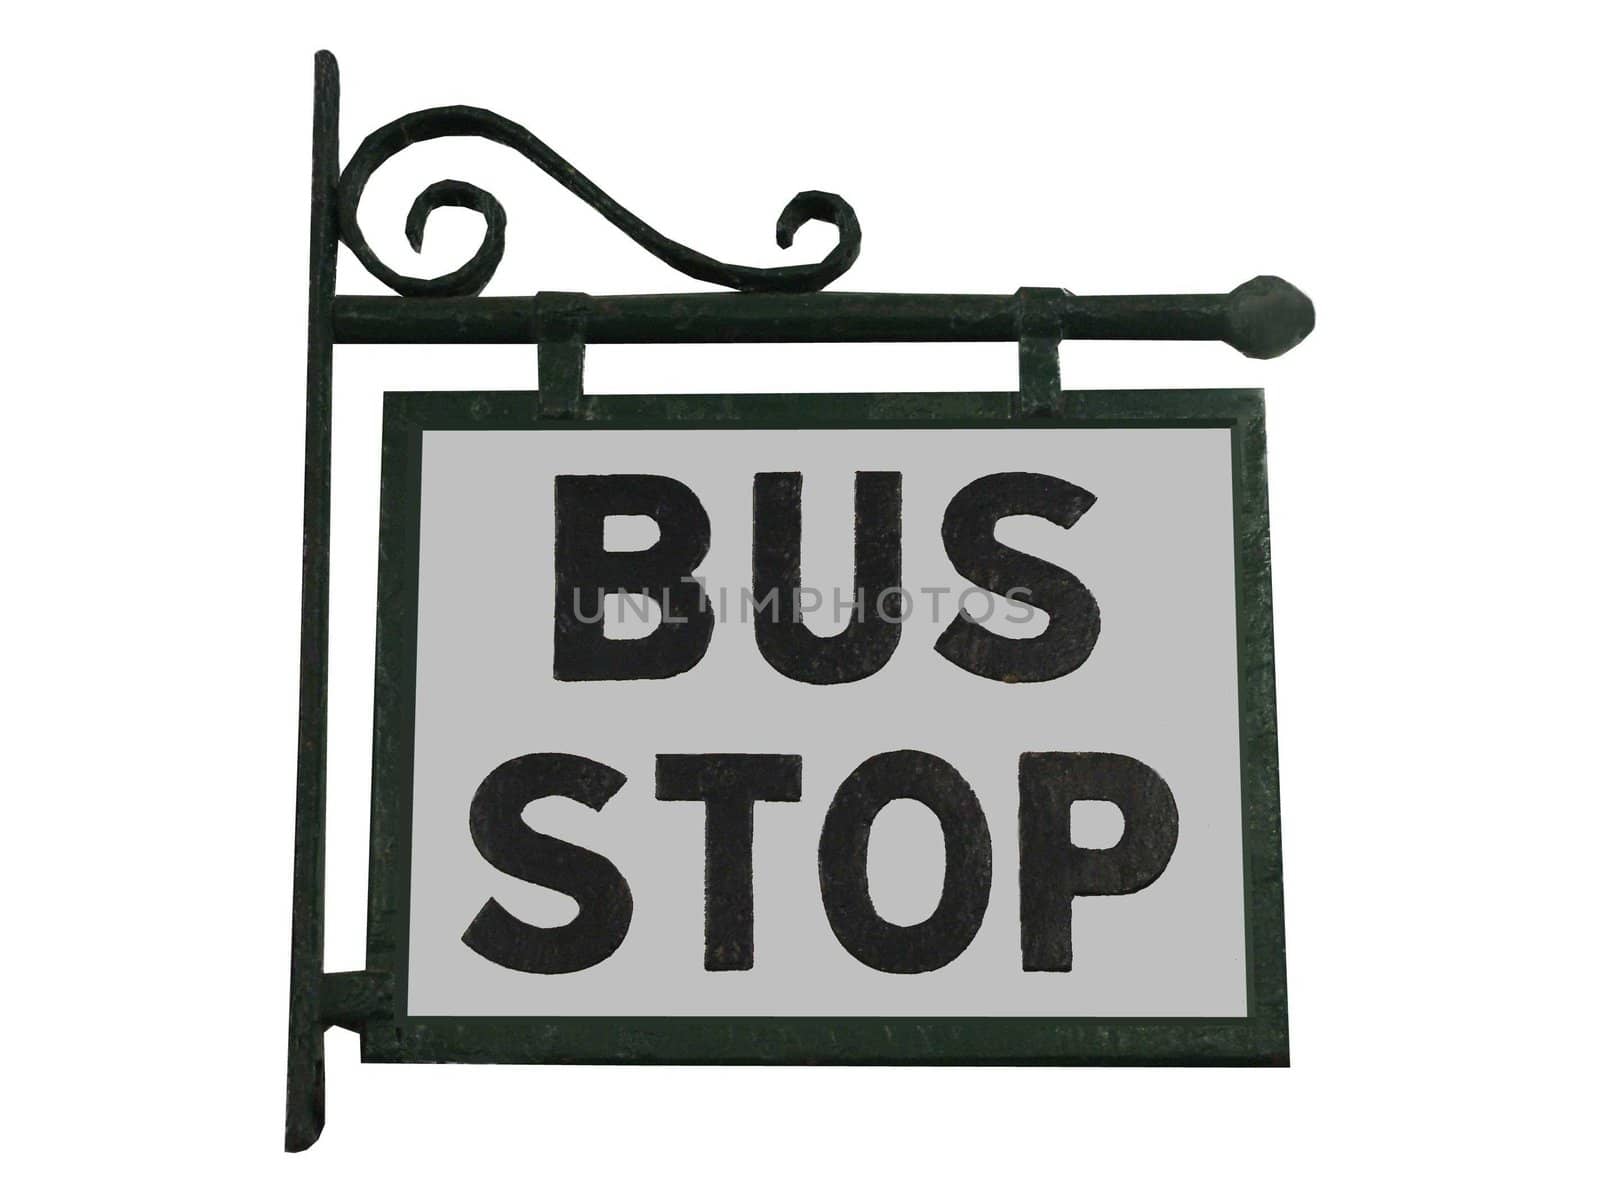 An Old Traditional Metal Bus Stop Sign.